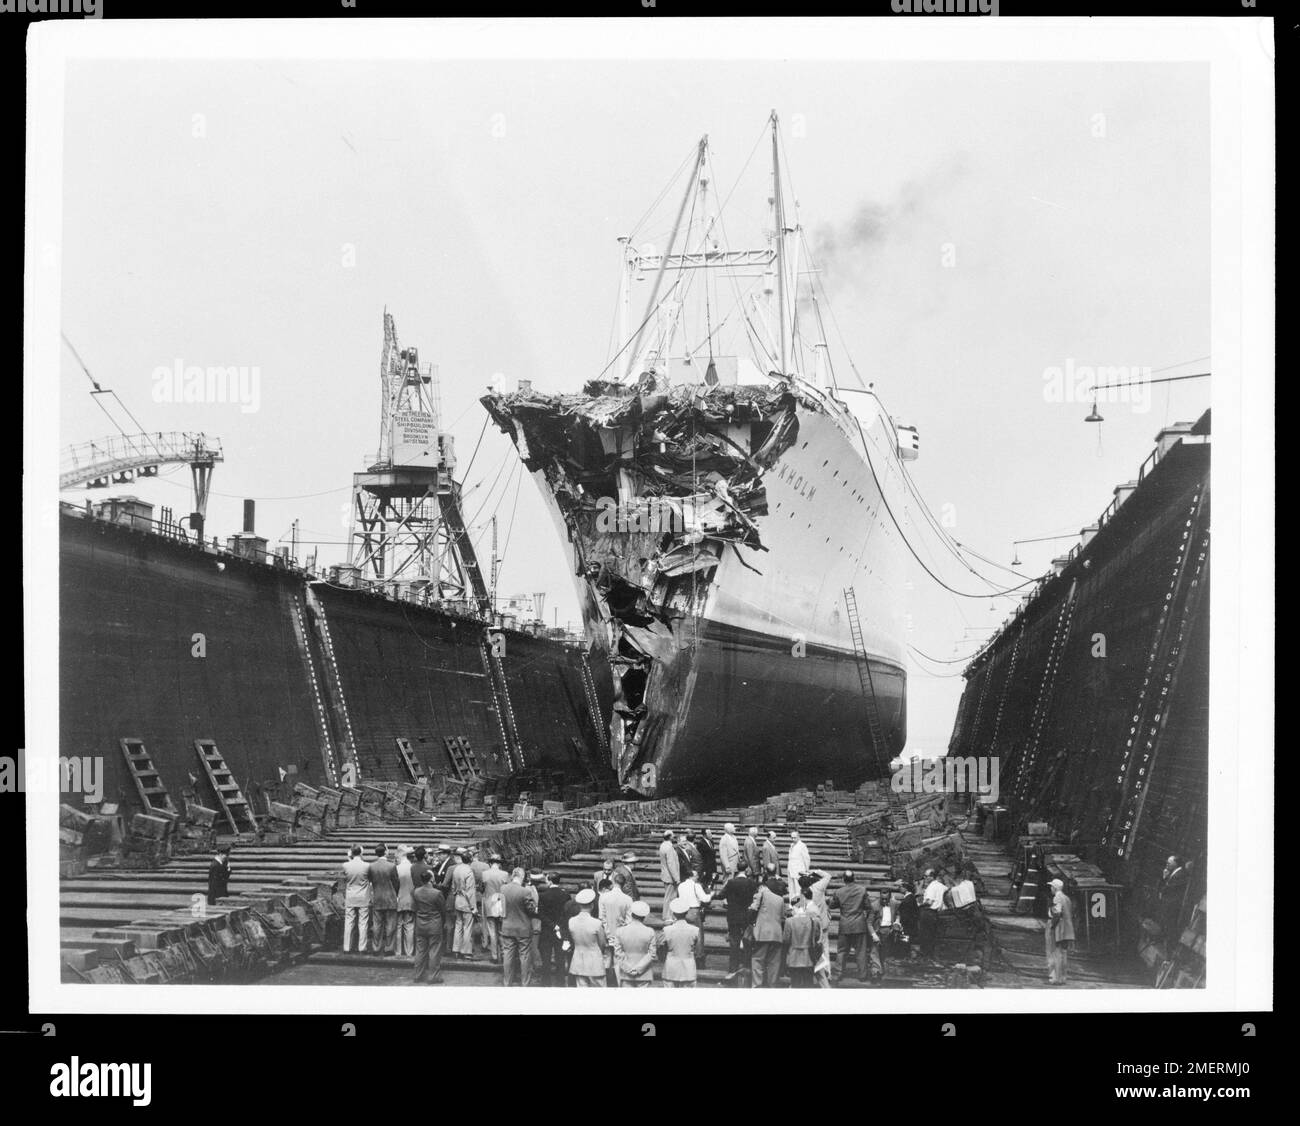 SS Stockholm in Drydock at Pier 97, New York, After Collision with Andrea Doria. [One of nine] 9 pics copied for Merchant Marine Technical borrowed by MMT from files of Merchant Marine Fisheries Committee (Photos taken by A. Miller of Bethlehem Steel Corp.). Stock Photo